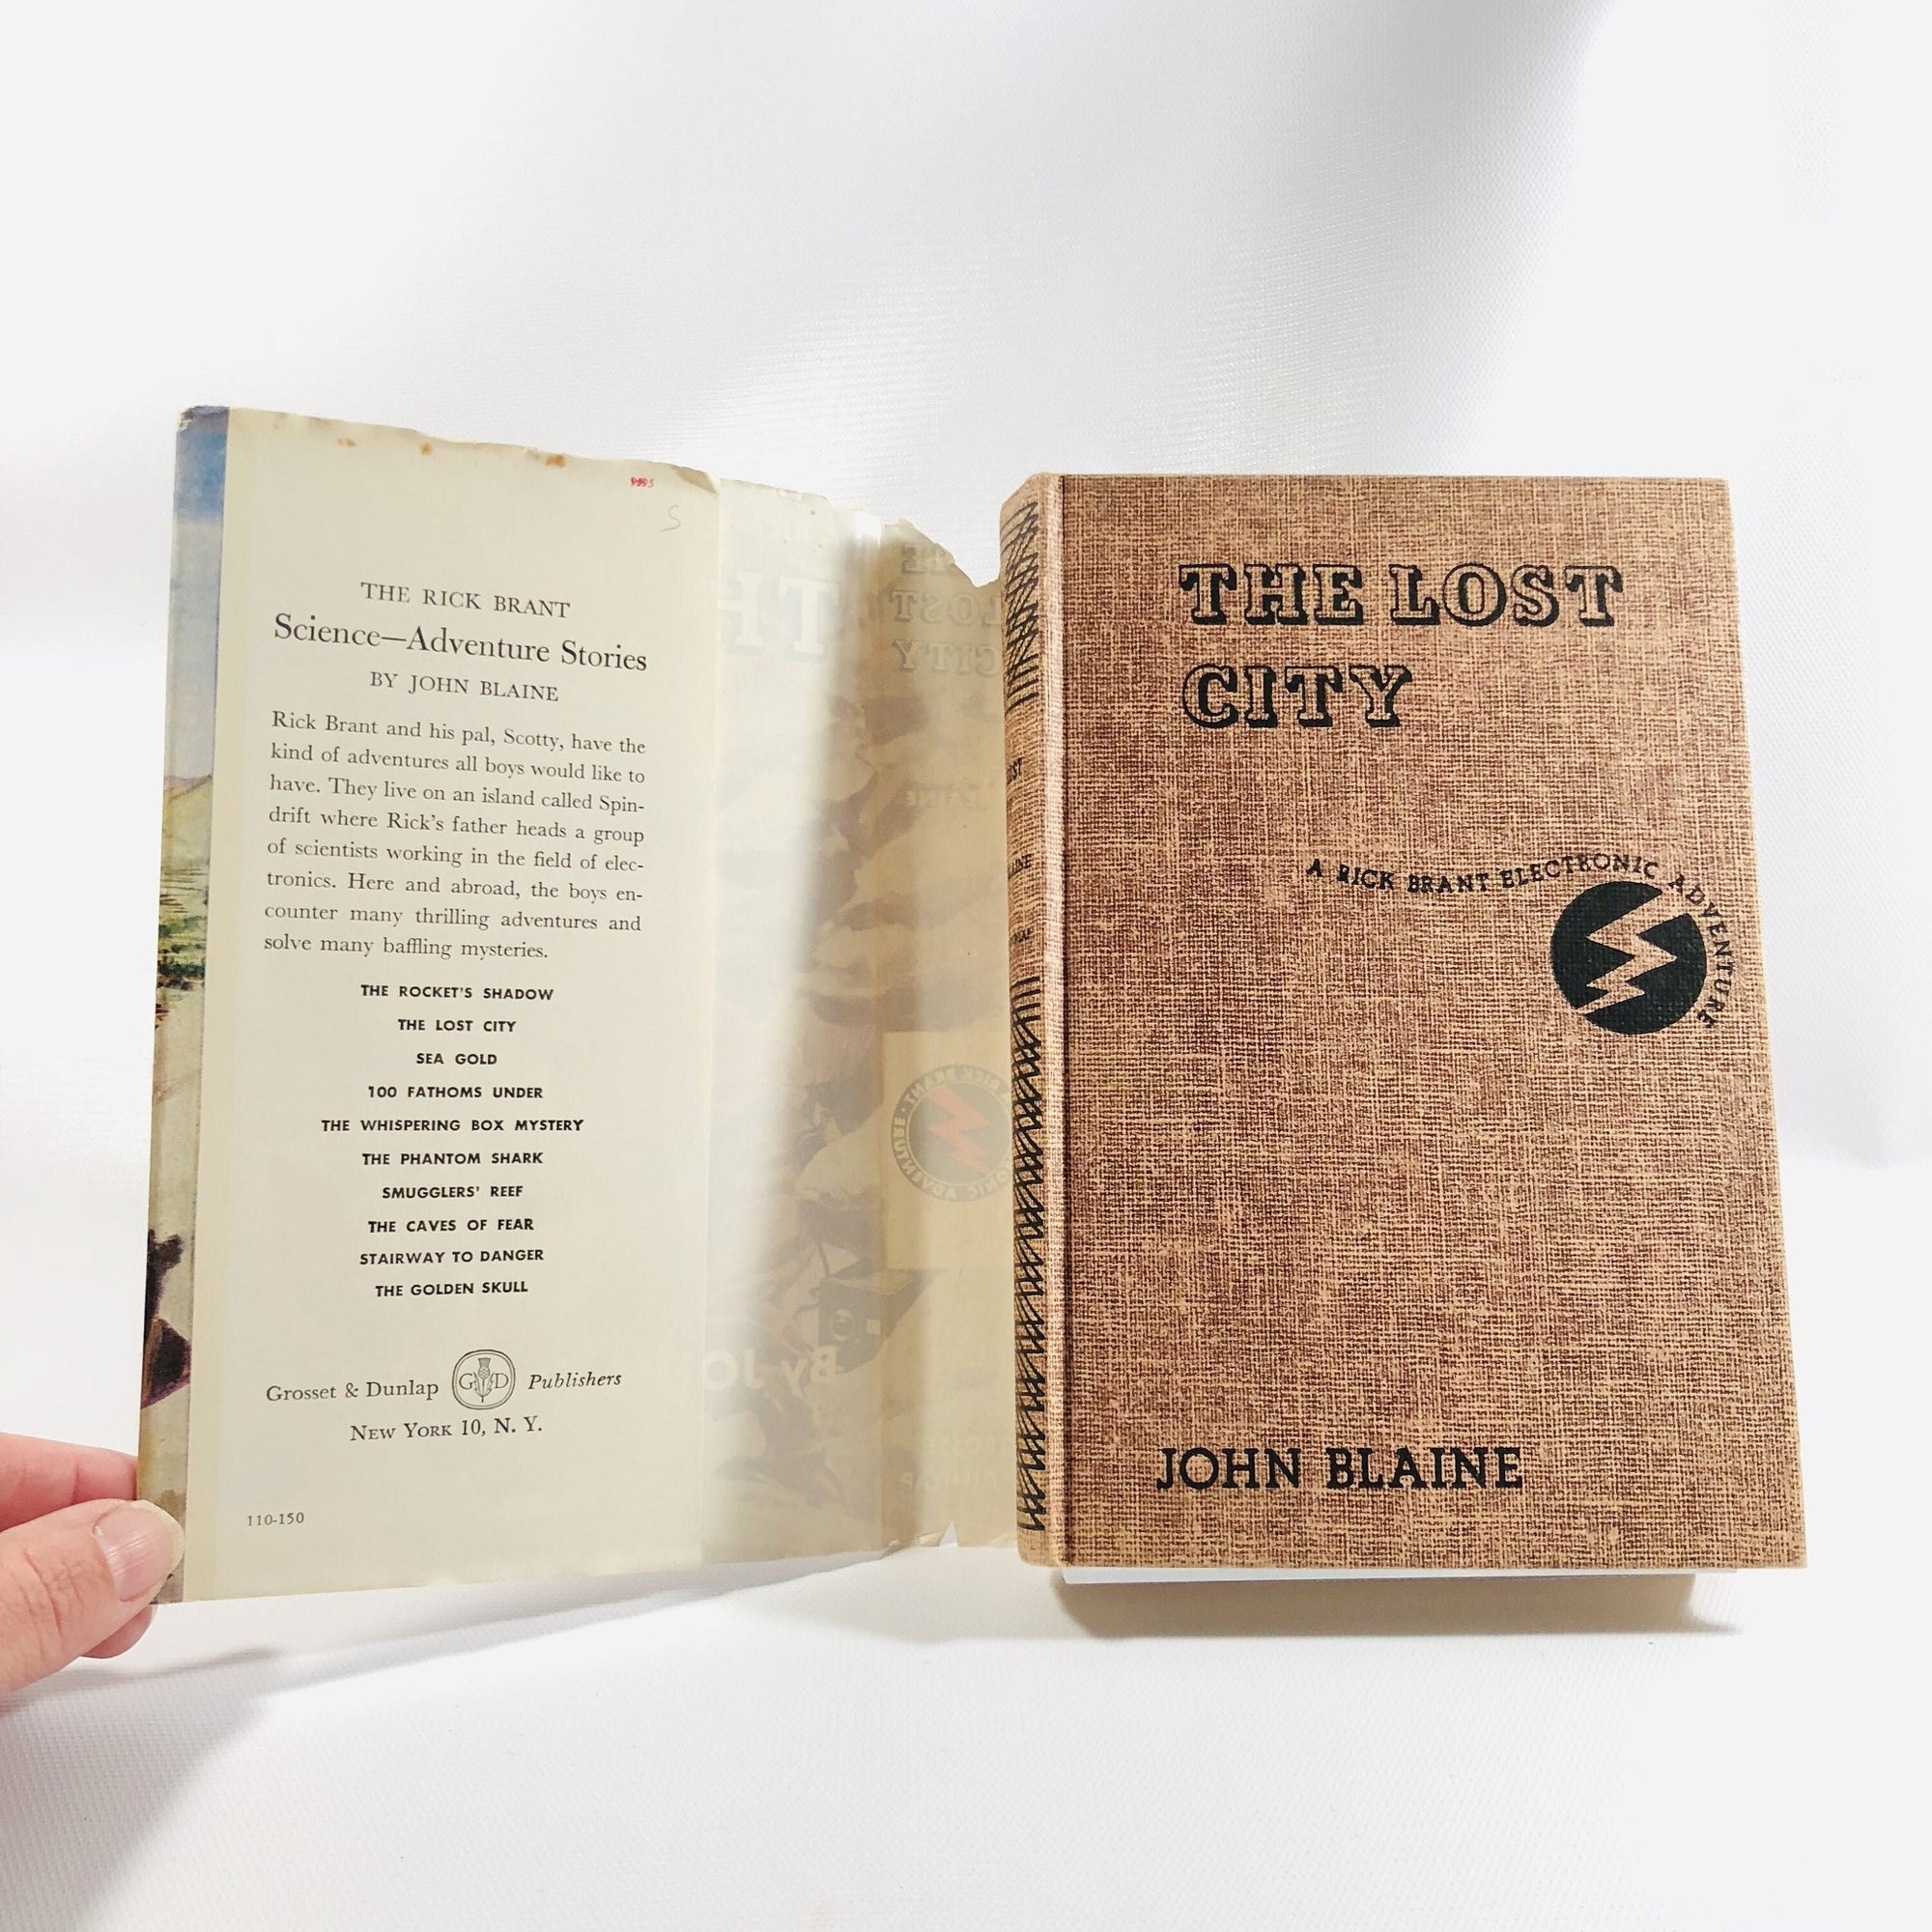 The Lost City by John Blaine 1947 Book 2 in The Rick Brant Electronic Adventure Vintage BookVintage Book